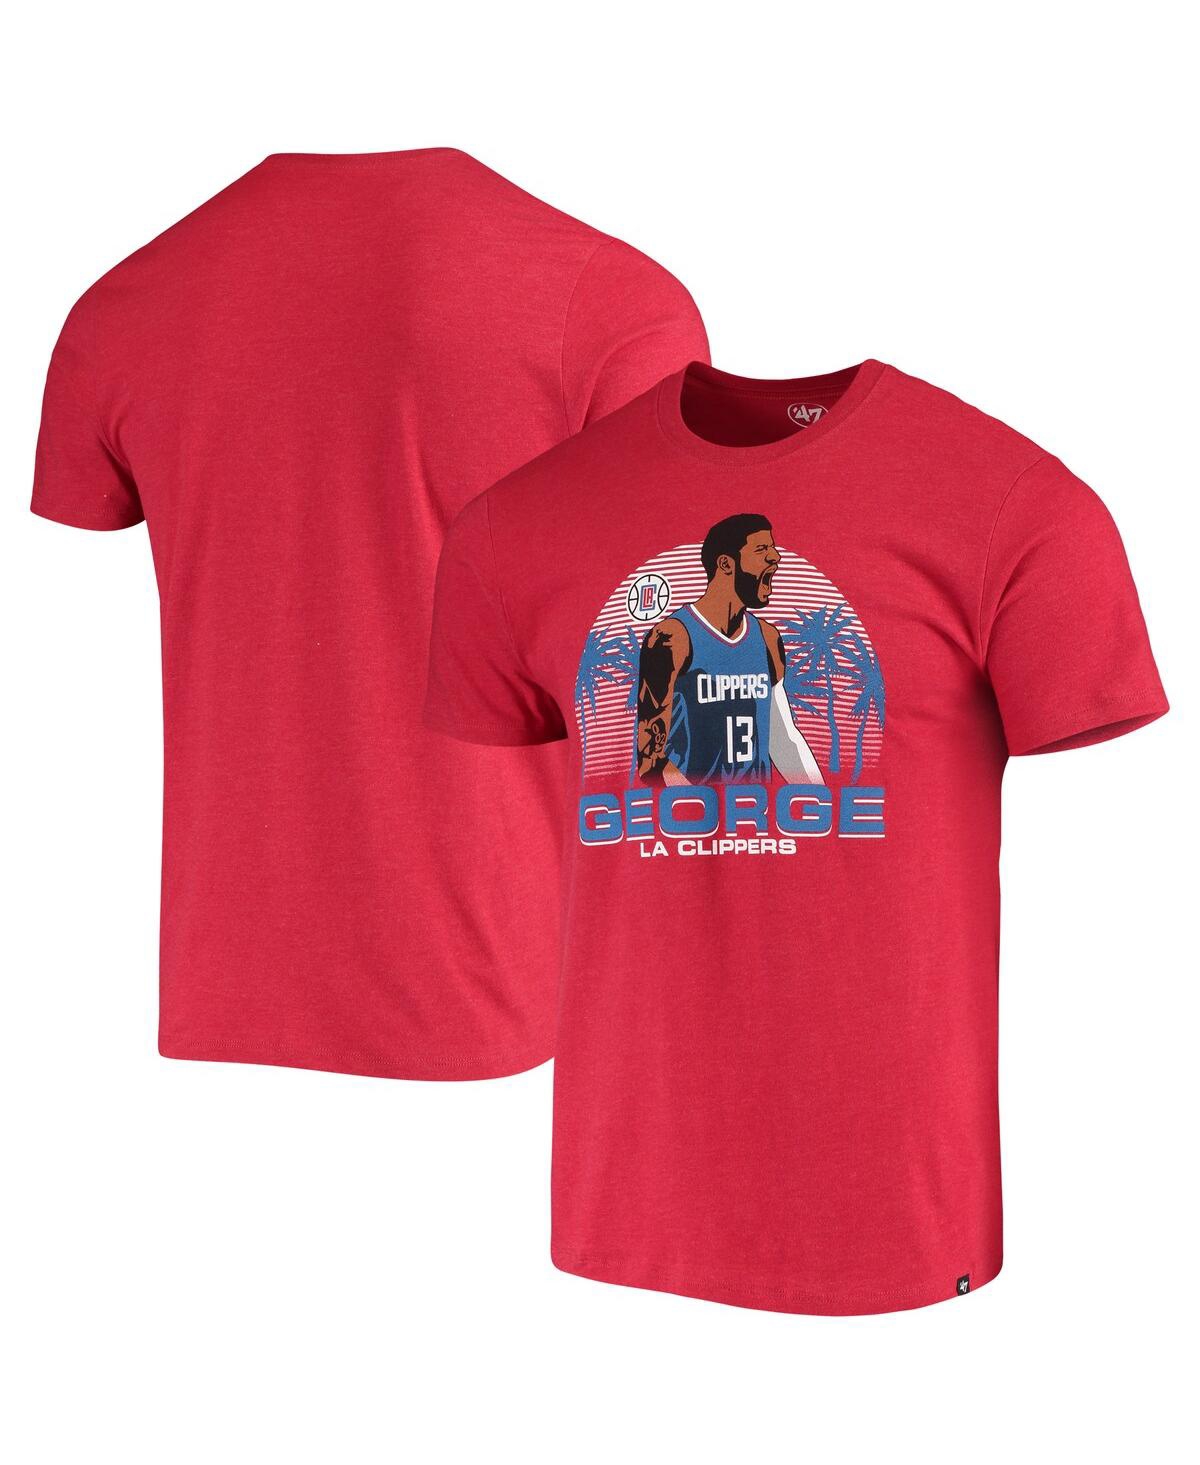 Men's Paul George Red La Clippers Player Graphic T-shirt - Red